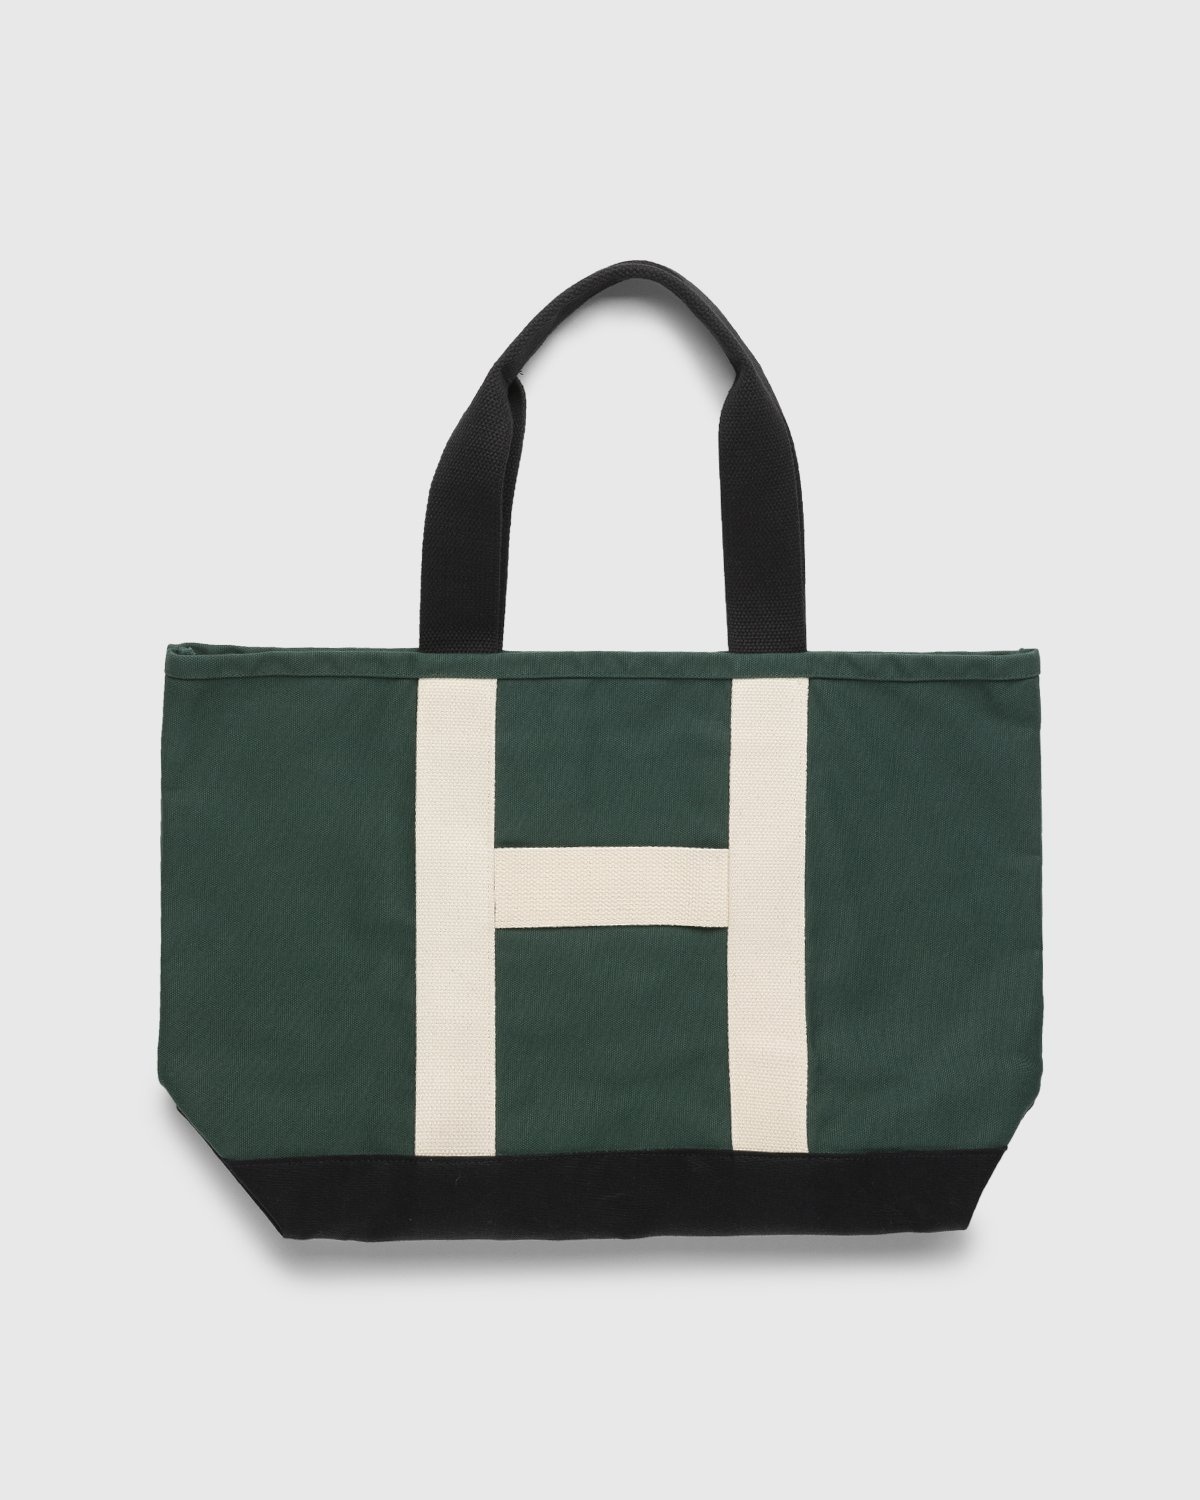 Highsnobiety – Large Staples Tote Bag Green - Tote Bags - Green - Image 1